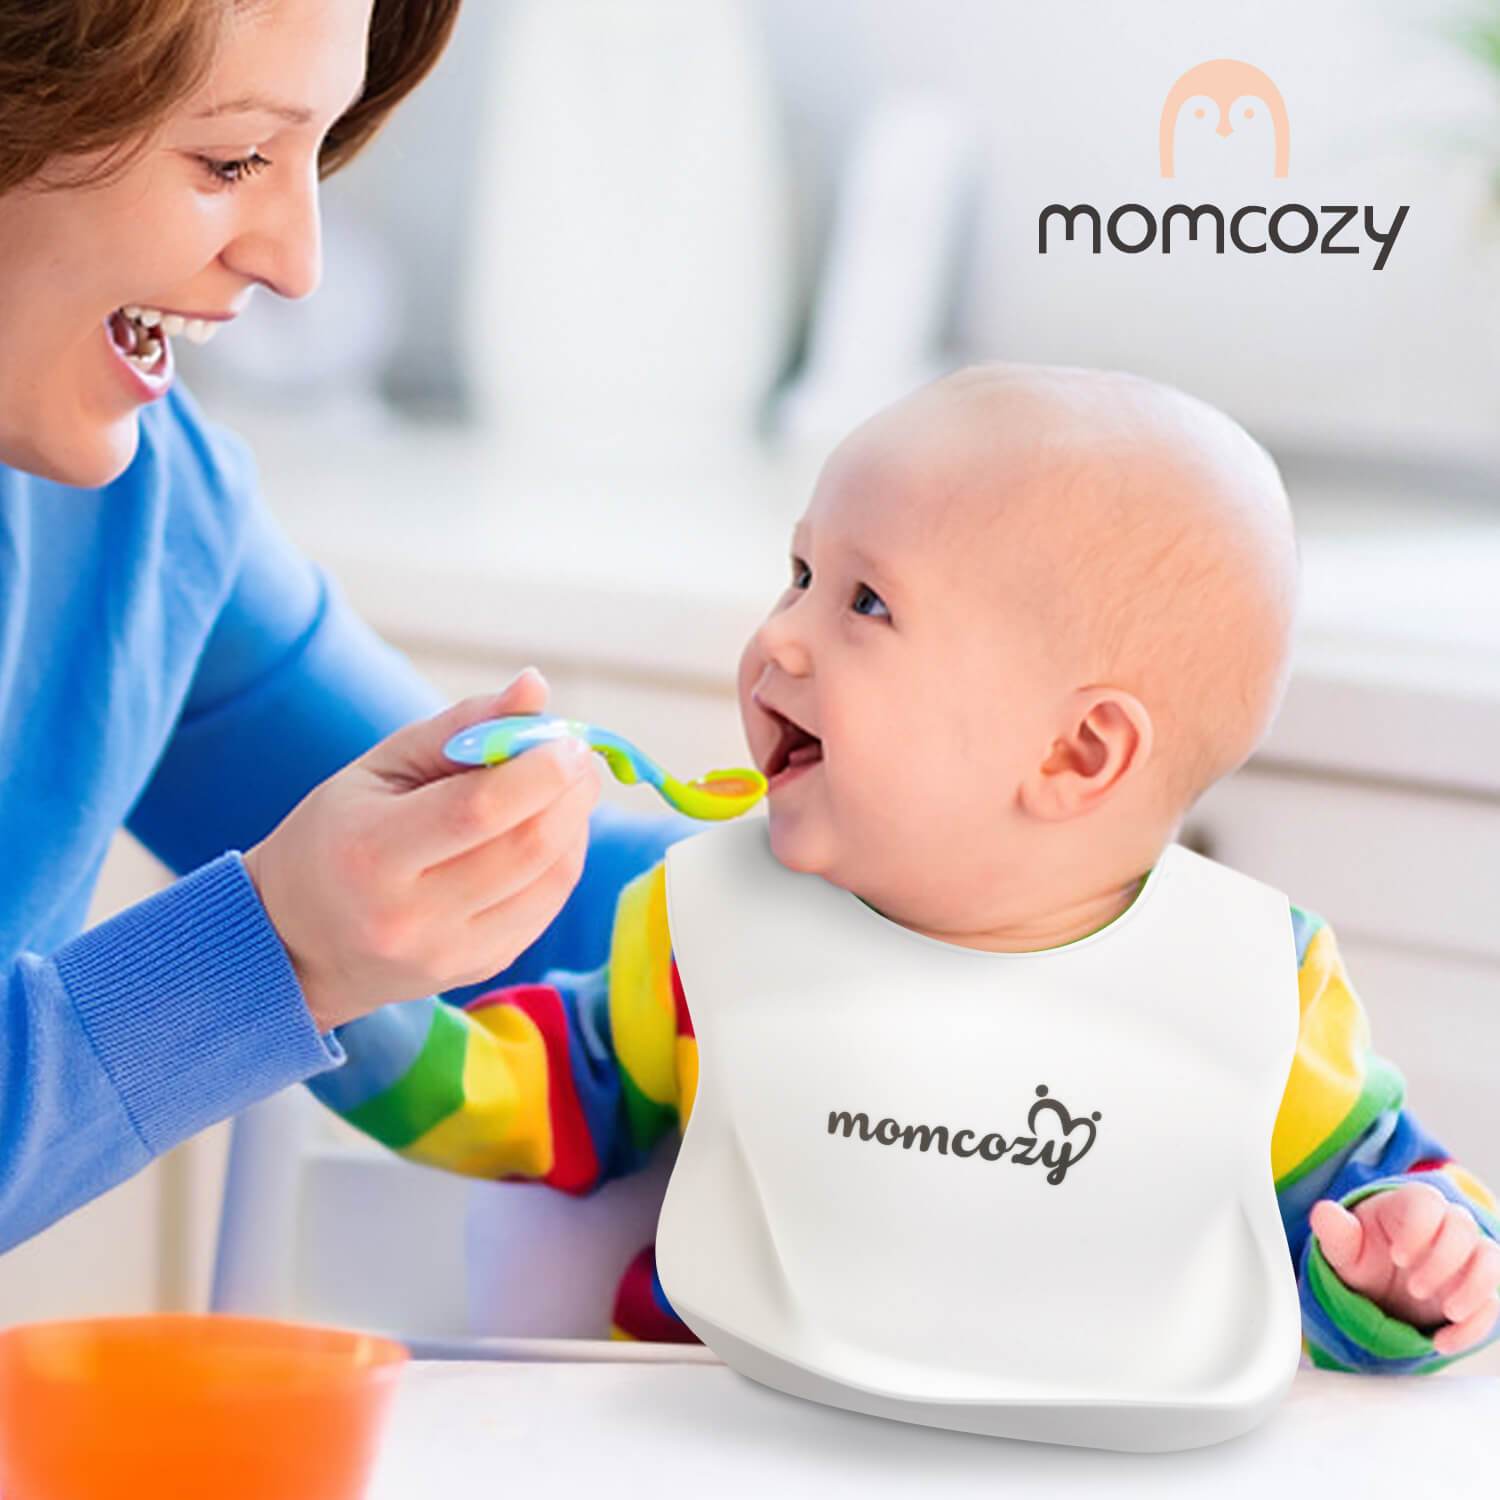 5 Things to Be Aware While Using Baby Bibs